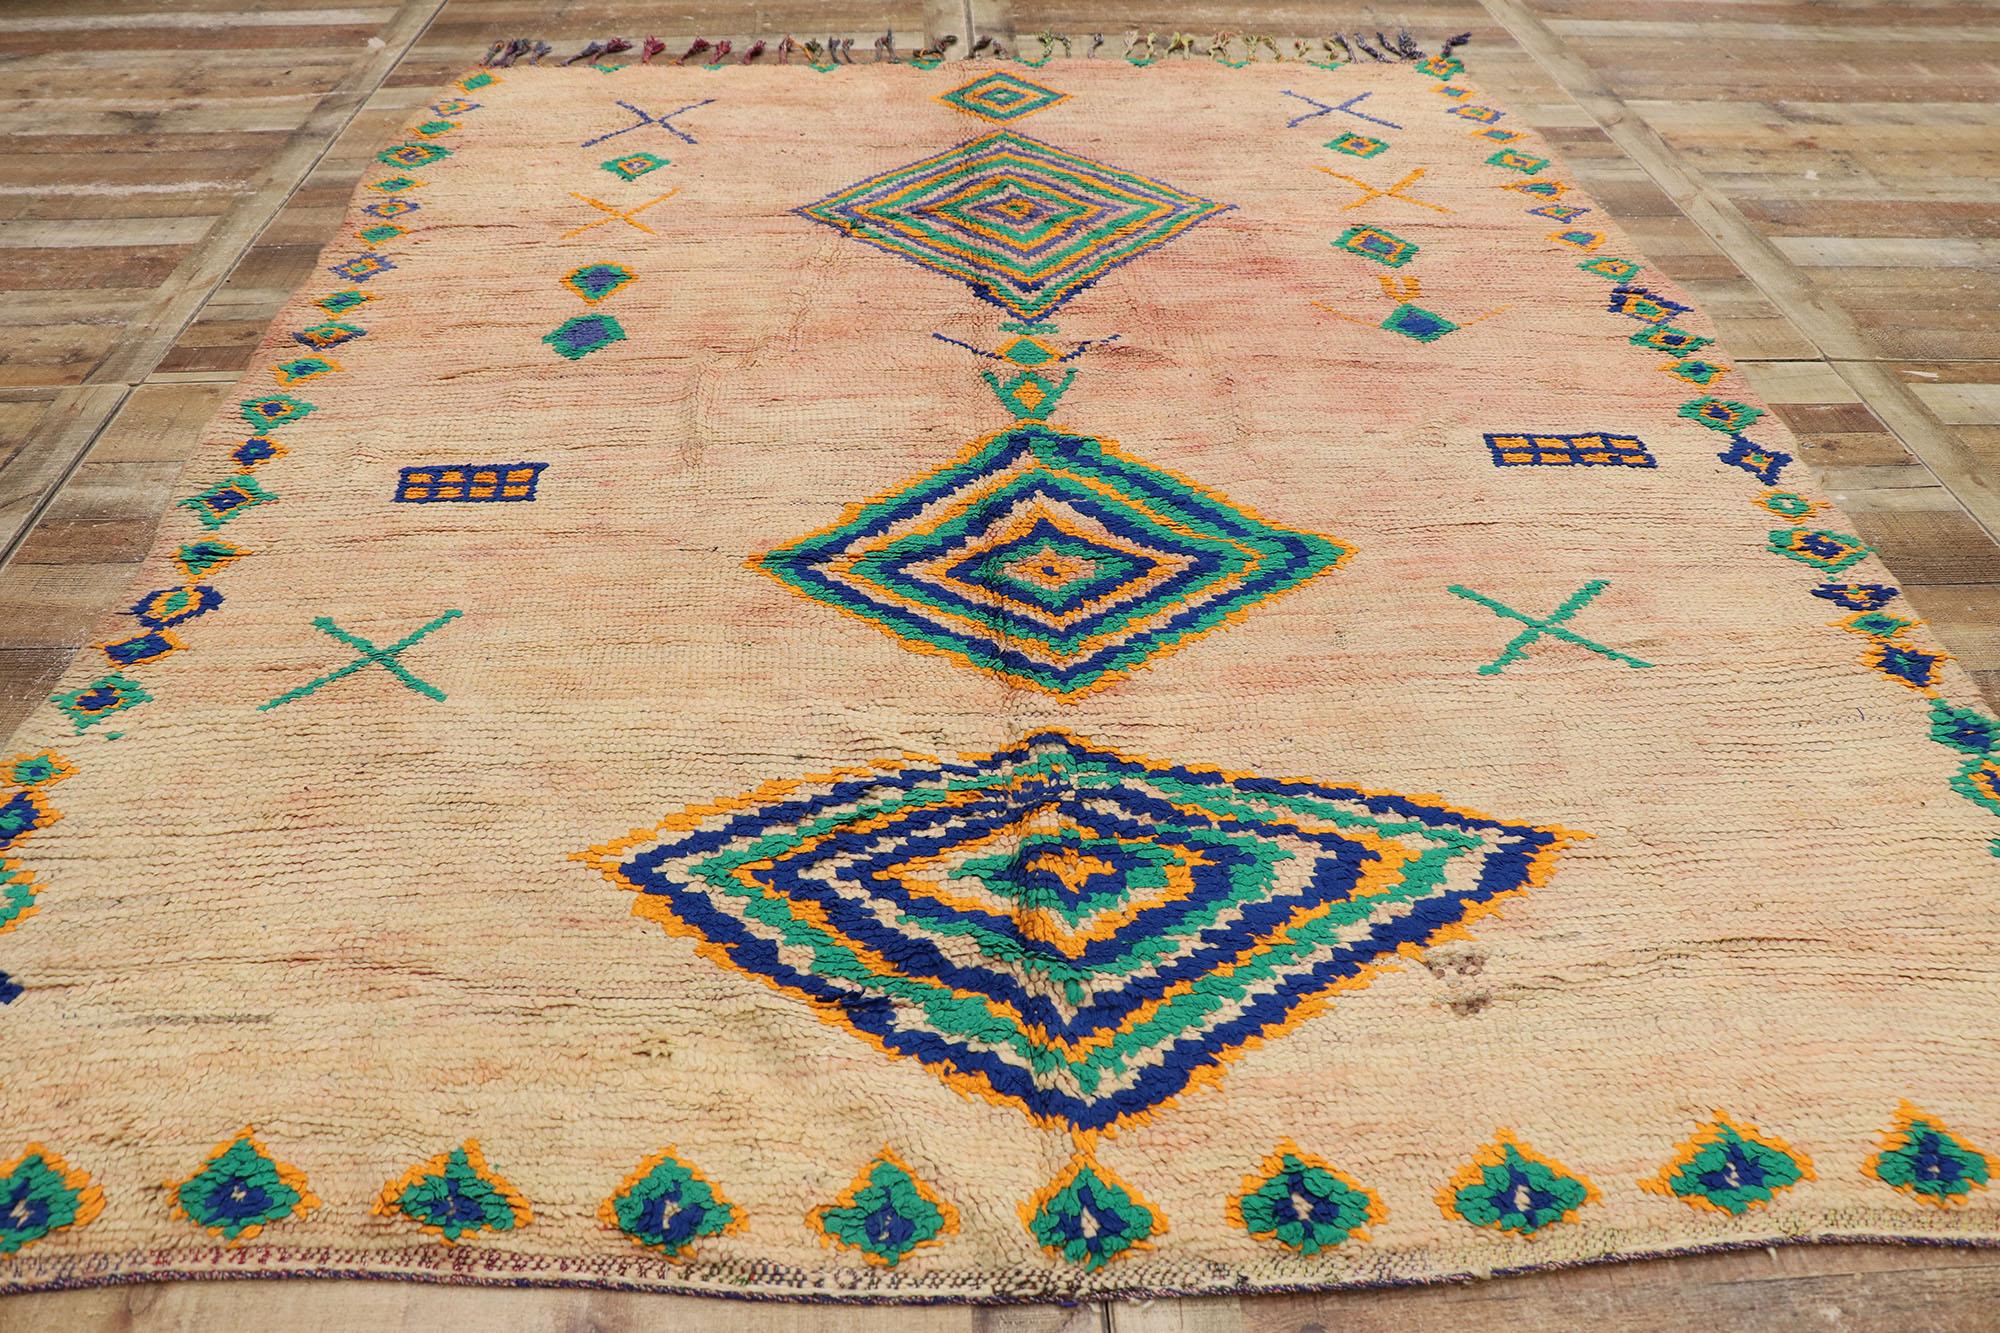 Wool Vintage Berber Boujad Moroccan Rug with Boho Chic Tribal Style